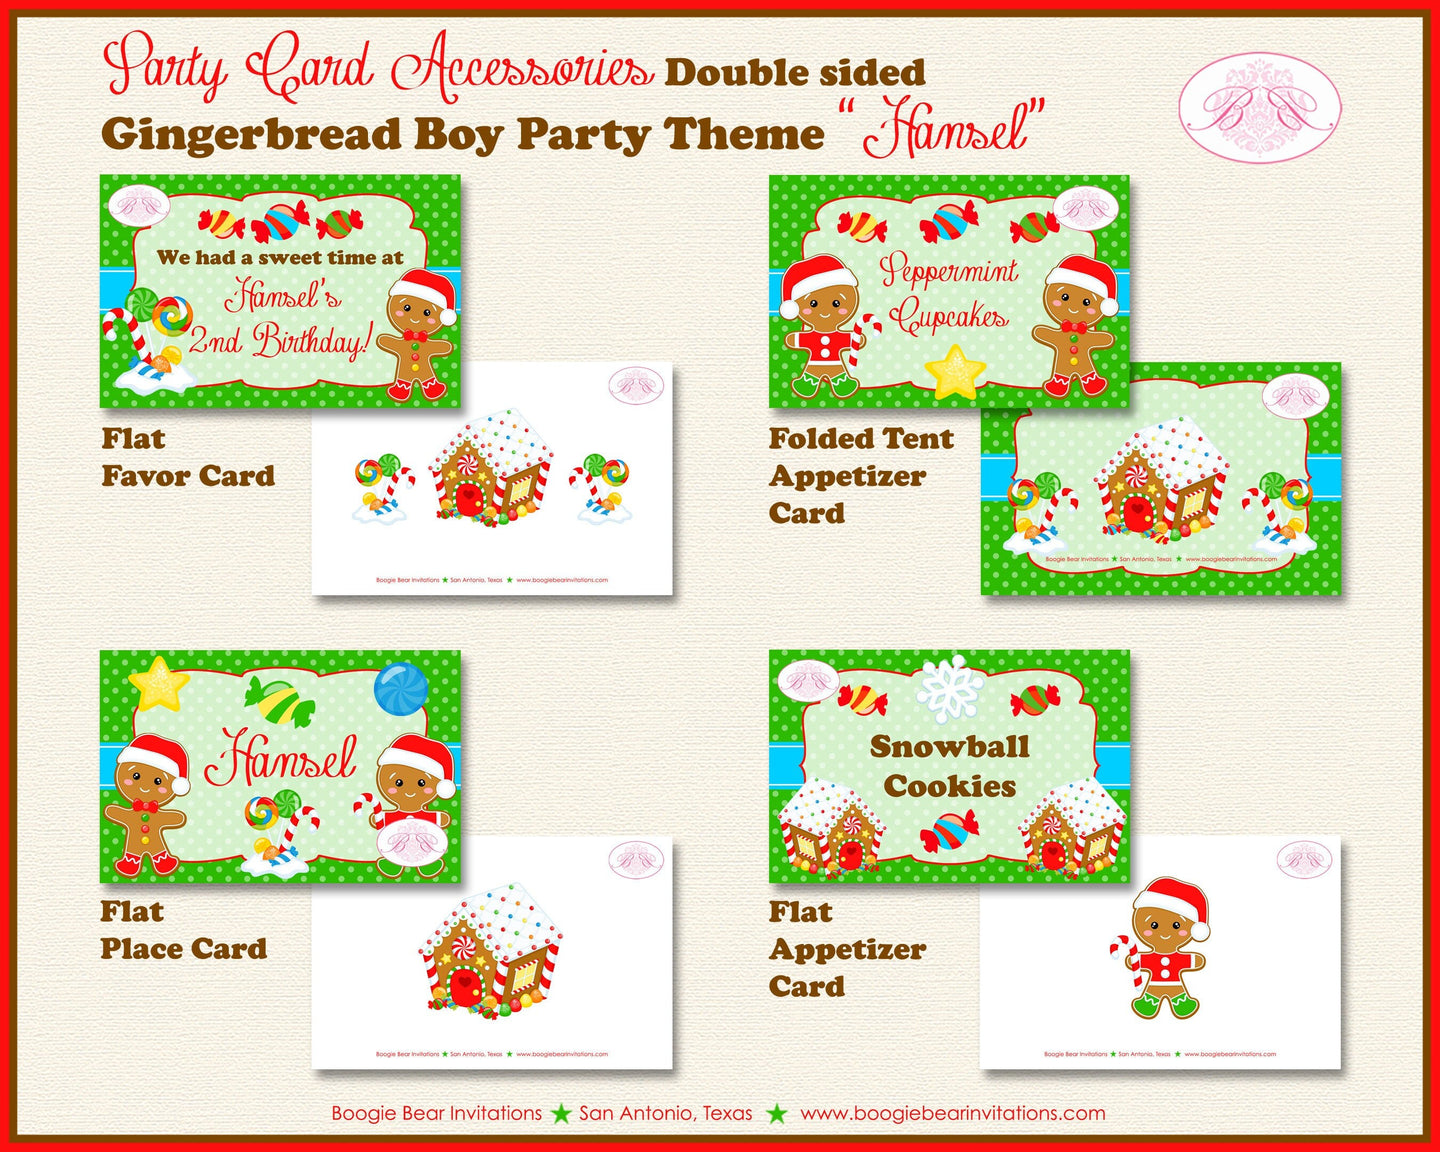 Gingerbread Boy Birthday Party Favor Card Appetizer Food Place Sign Label Winter Snowflake Christmas Boogie Bear Invitations Hansel Theme